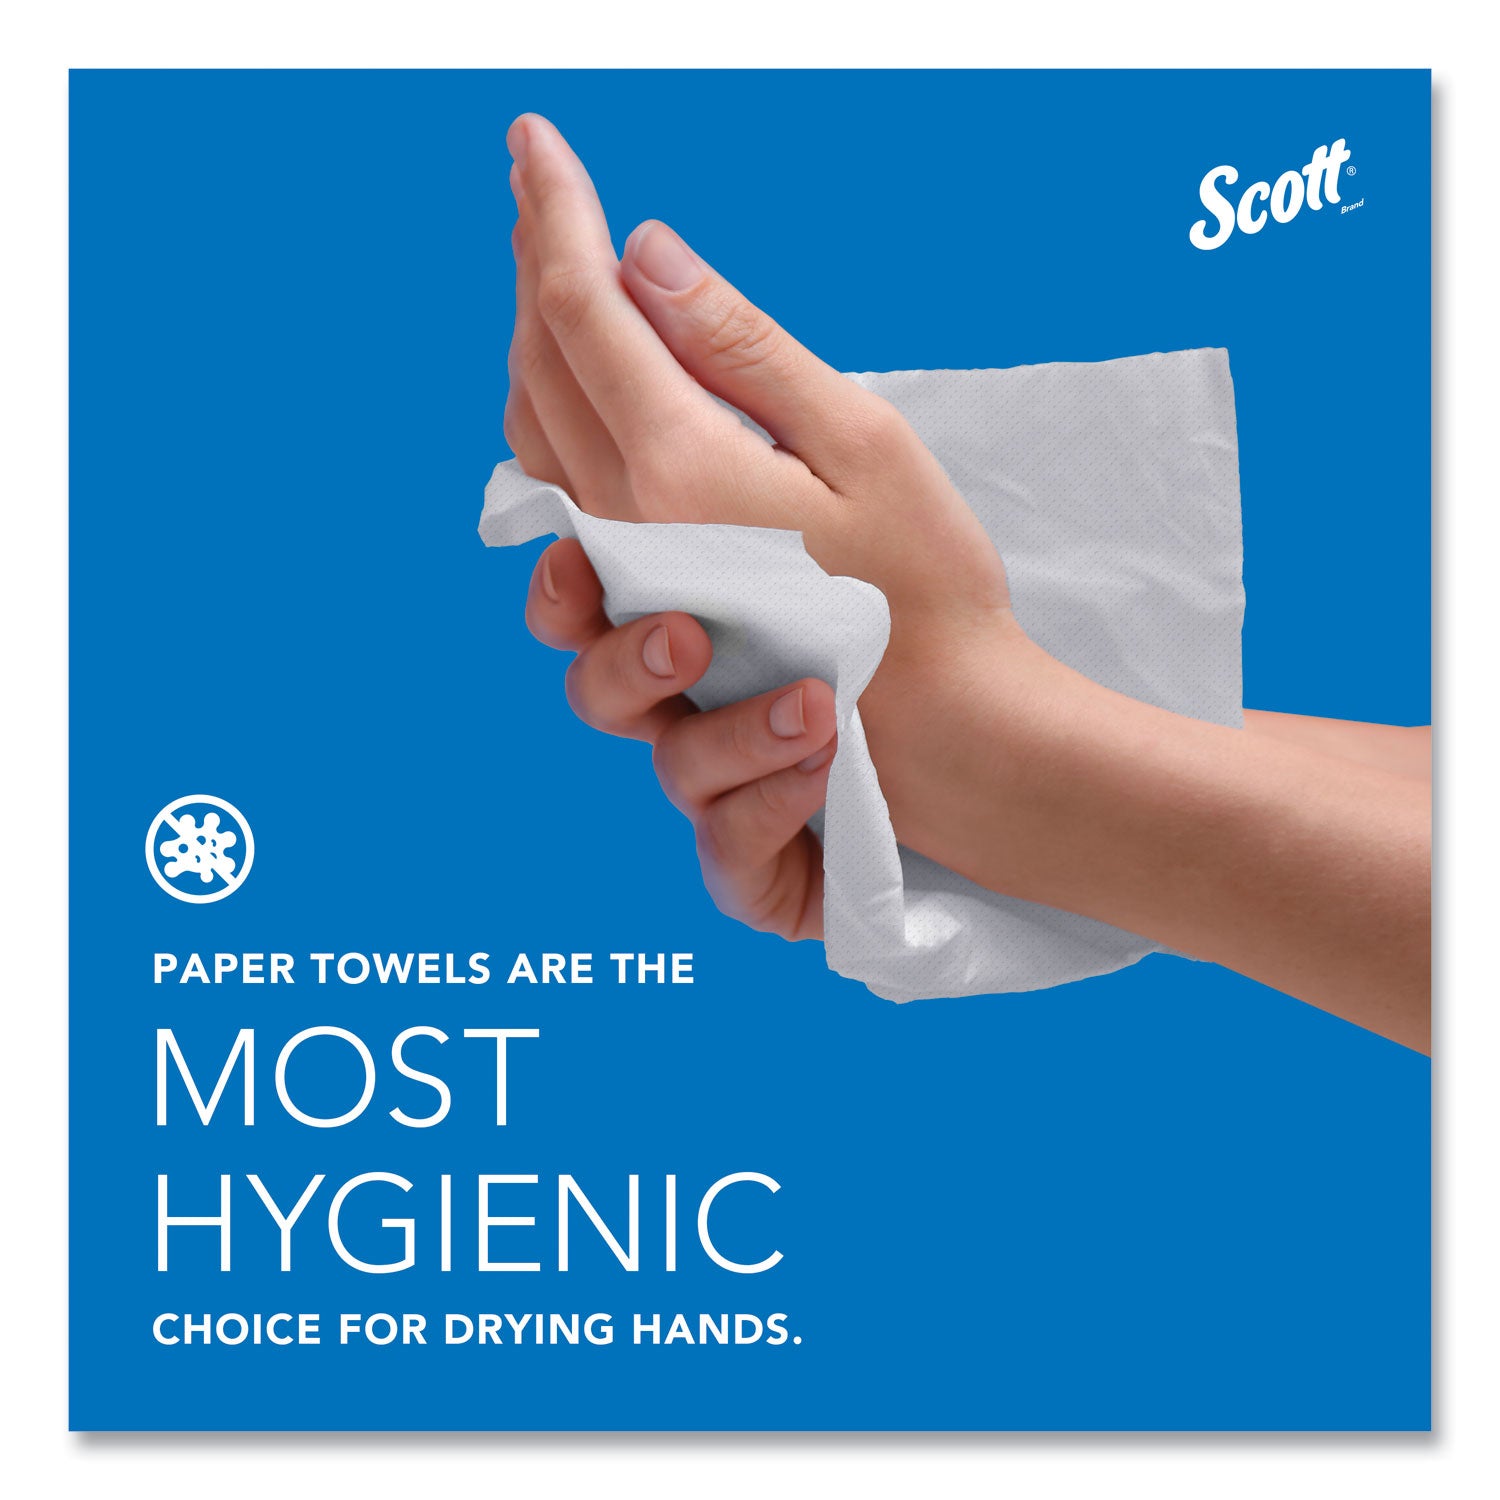 Essential Multi-Fold Towels 100% Recycled, 1-Ply, 9.2 x 9.4, White, 250/Pack, 16 Packs/Carton - 